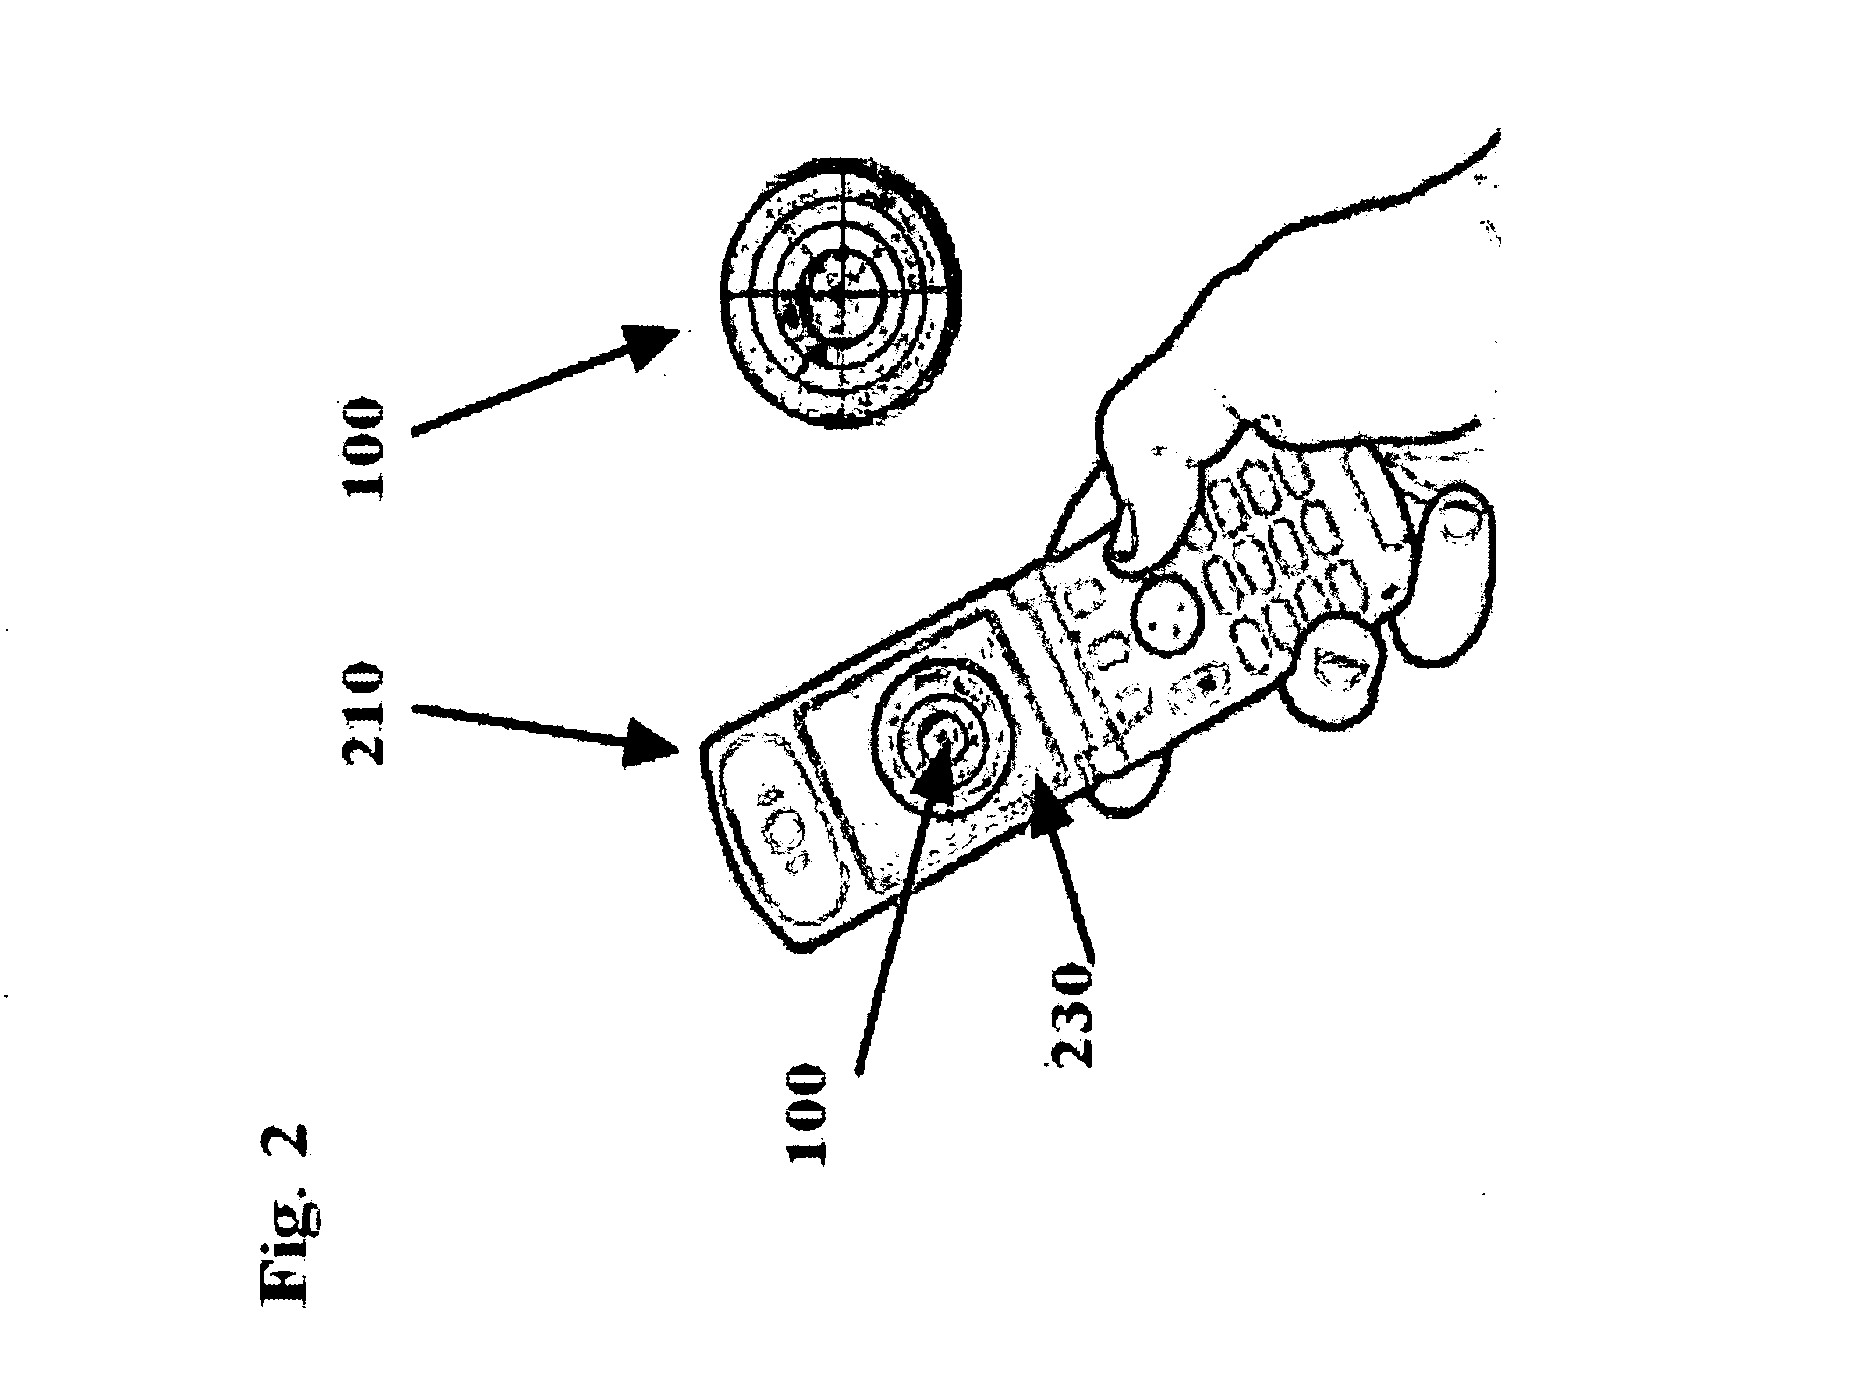 System and method for generate and update real time navigation waypoint automatically